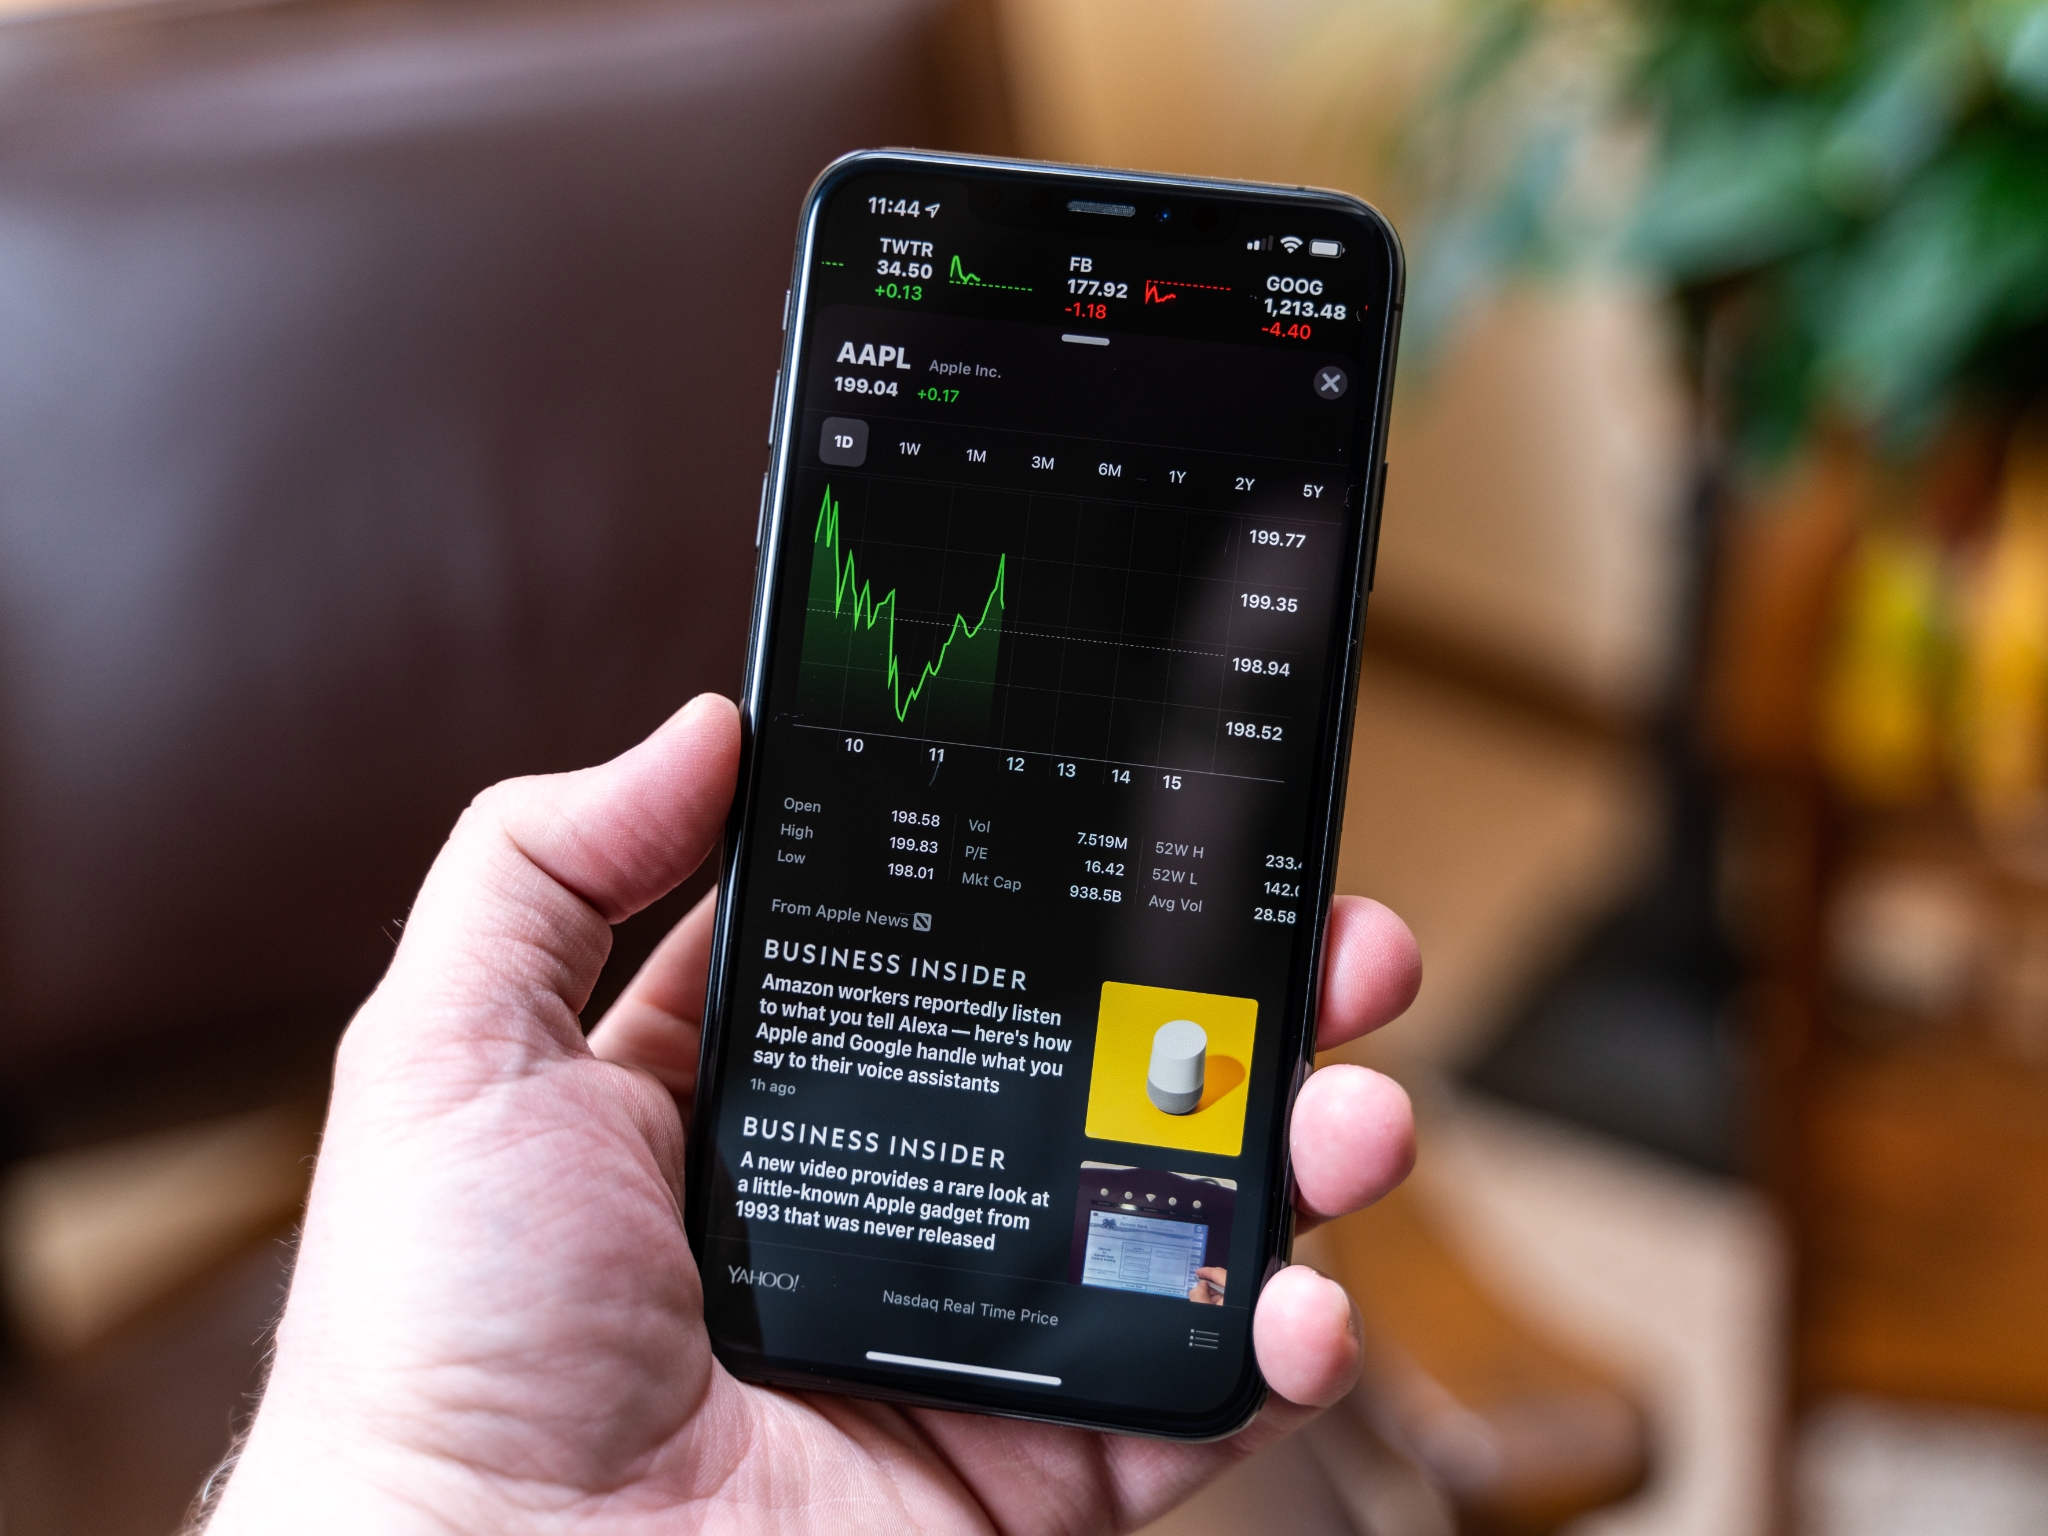 How to check stocks and exchanges using Siri